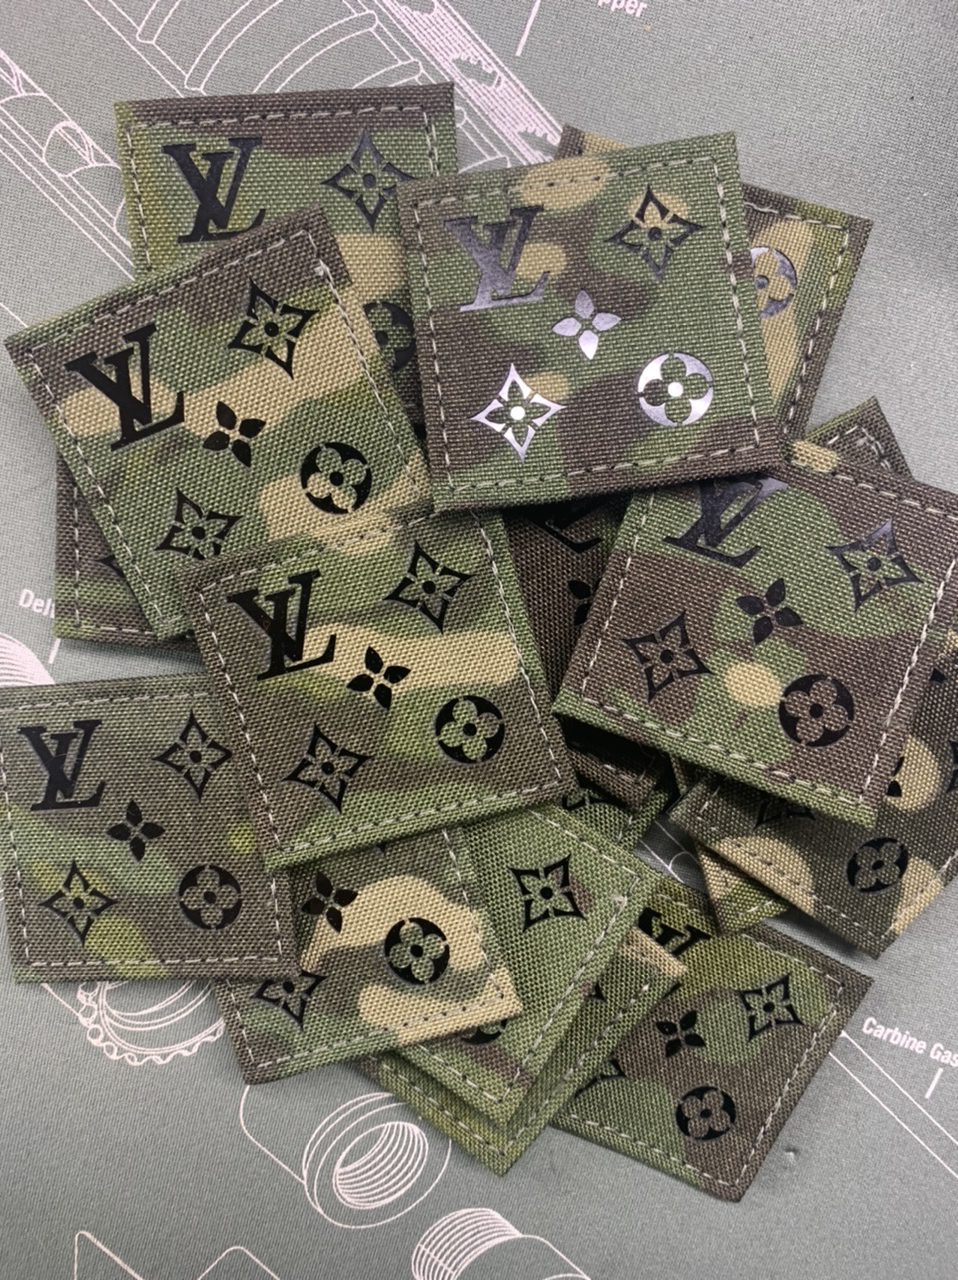 Lv Chain Links Patches  Natural Resource Department